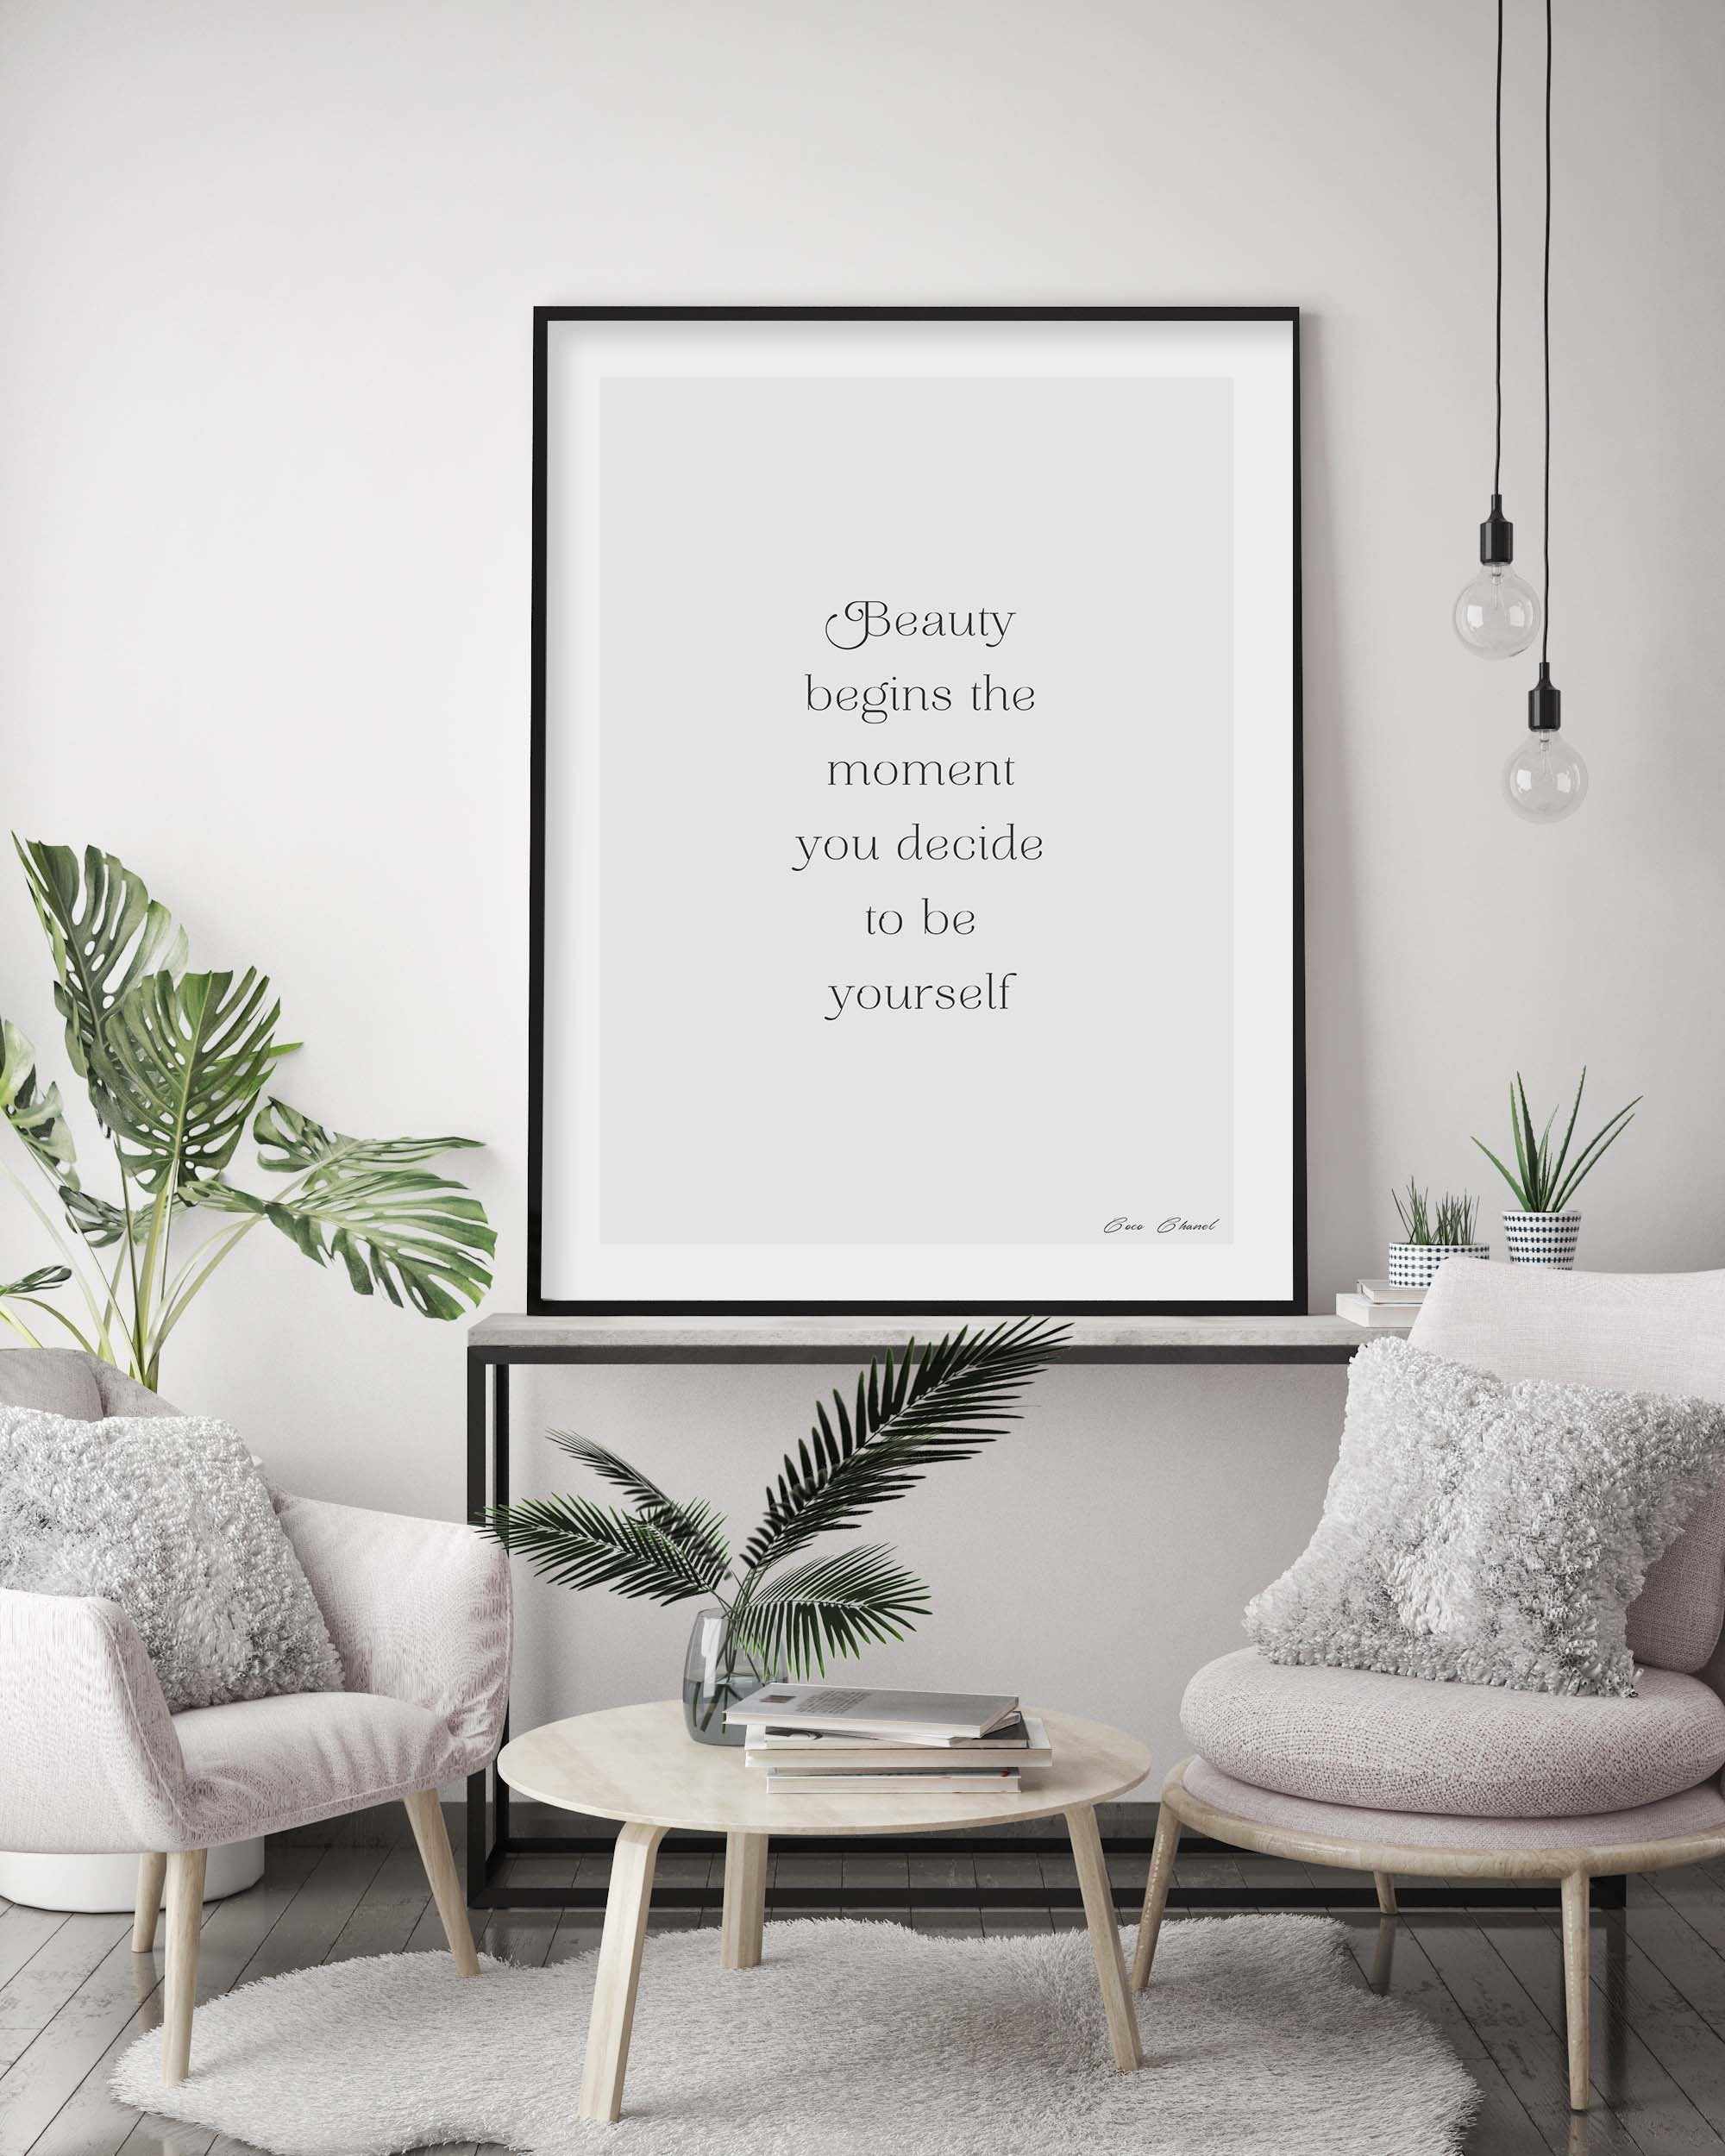  Coco Chanel Inspirational “Beauty Begins” Typography Word Wall  Art - 11x14 UNFRAMED Print - Makes a Great Gift for Lovers of Minimalist,  Fashion, Motivational Decor. : Handmade Products